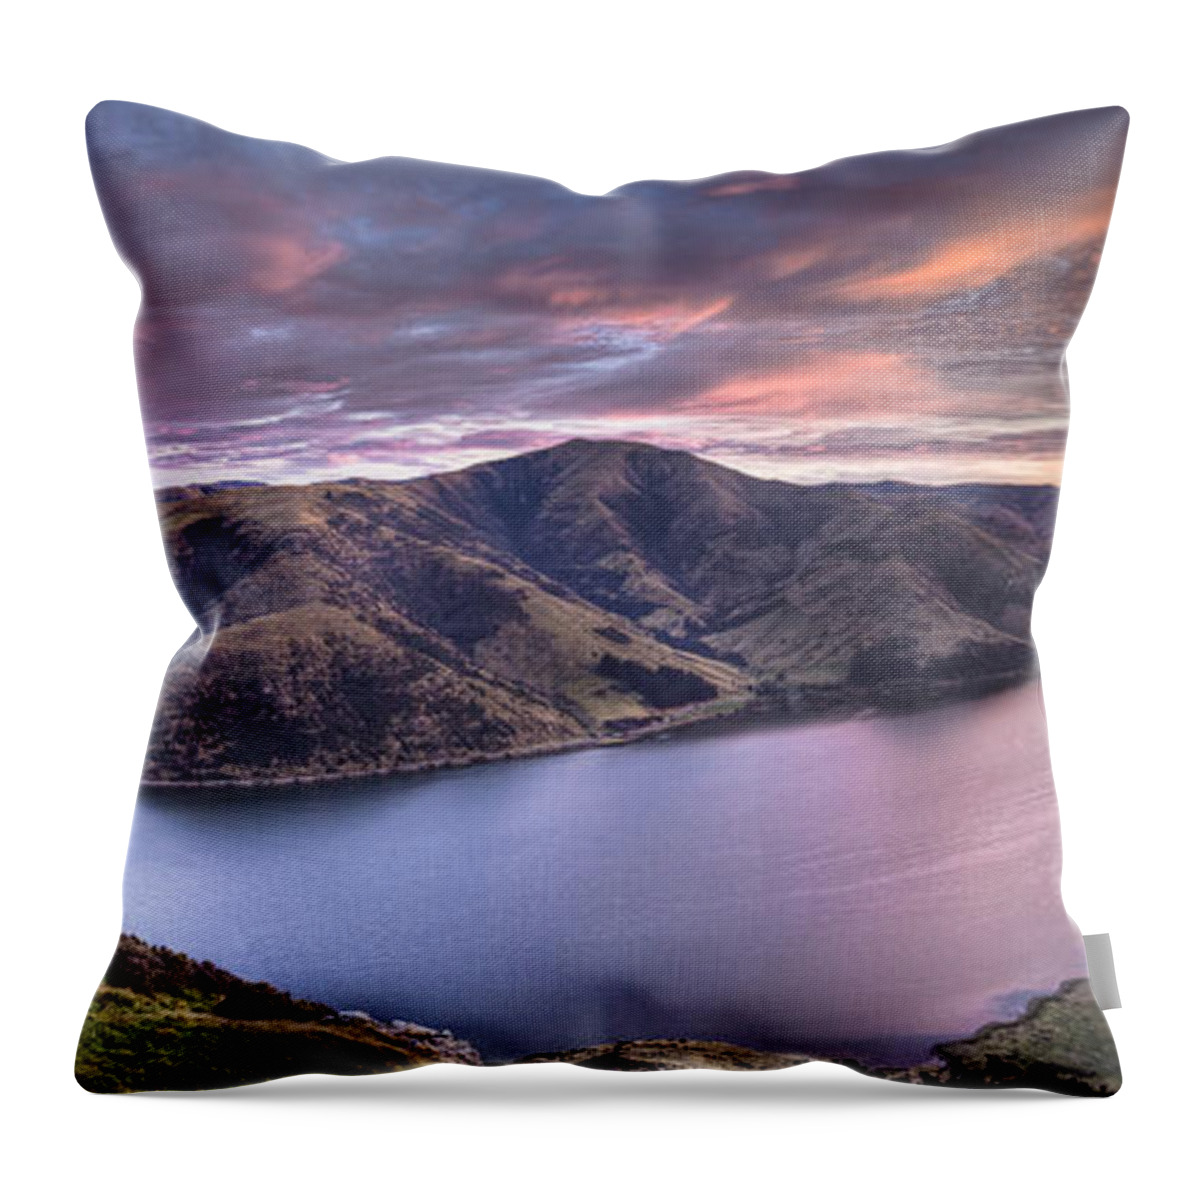 00441964 Throw Pillow featuring the photograph Lake Forsyth At Dawn Canterbury New by Colin Monteath